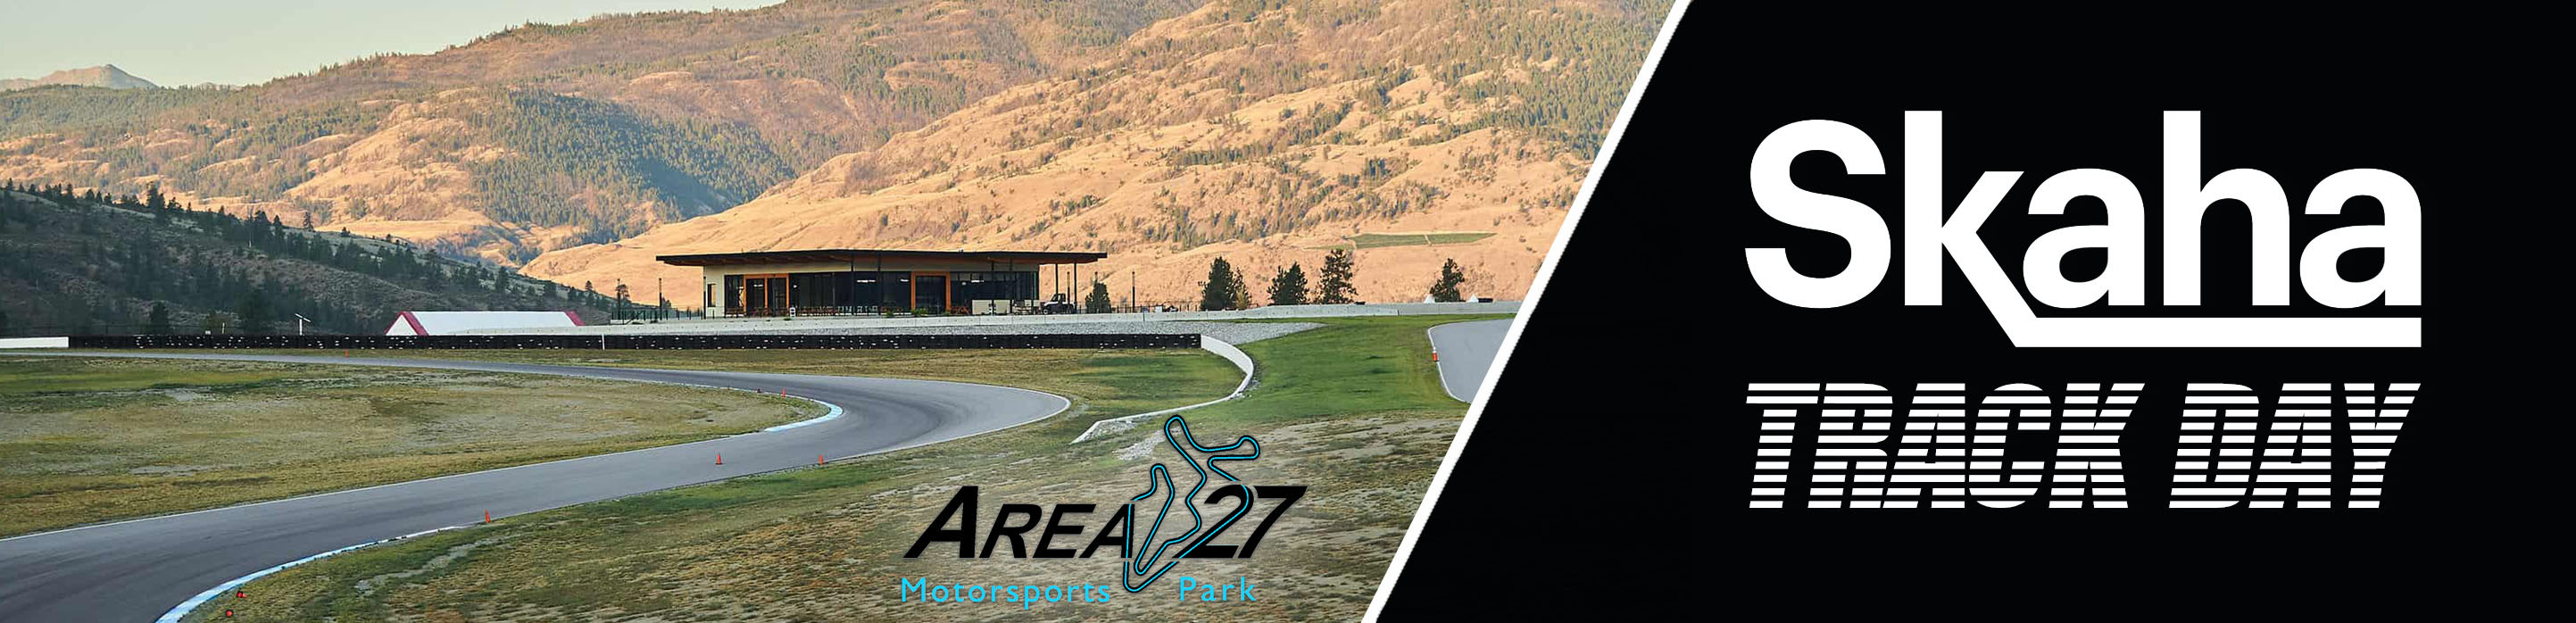 A banner with a race track circuit to promote Skaha Ford’s third annual Track Day on Thursday, June 2, 2022, at Area 27 Motorsports Park in Oliver, BC